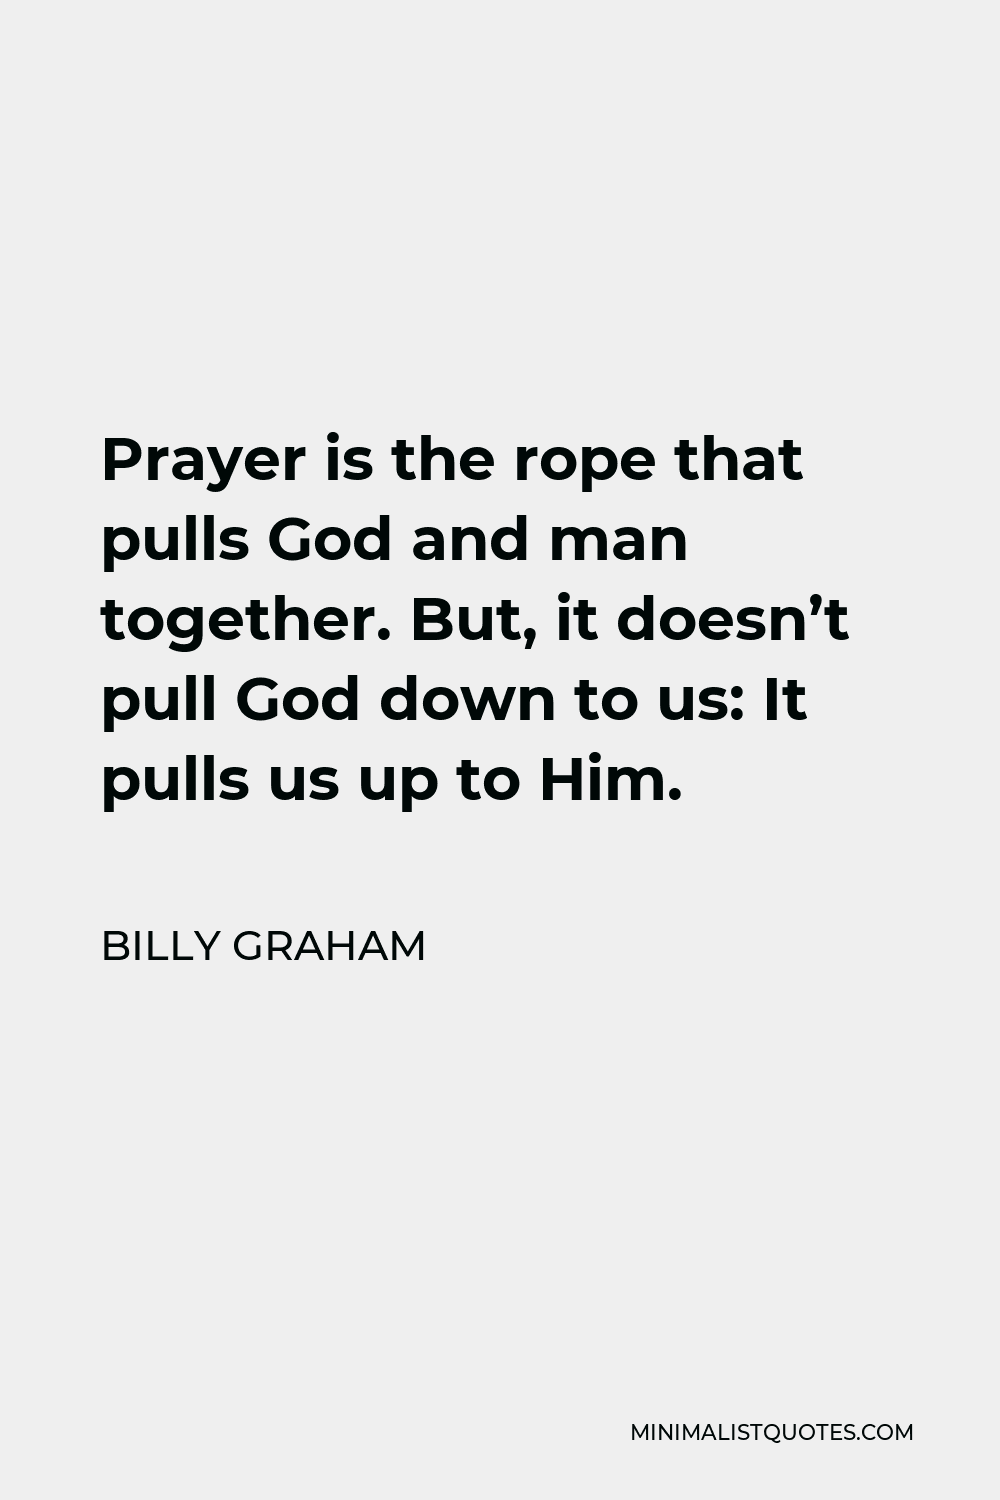 Billy Graham Quote - Prayer is the rope that pulls God and man together. But, it doesn’t pull God down to us: It pulls us up to Him.